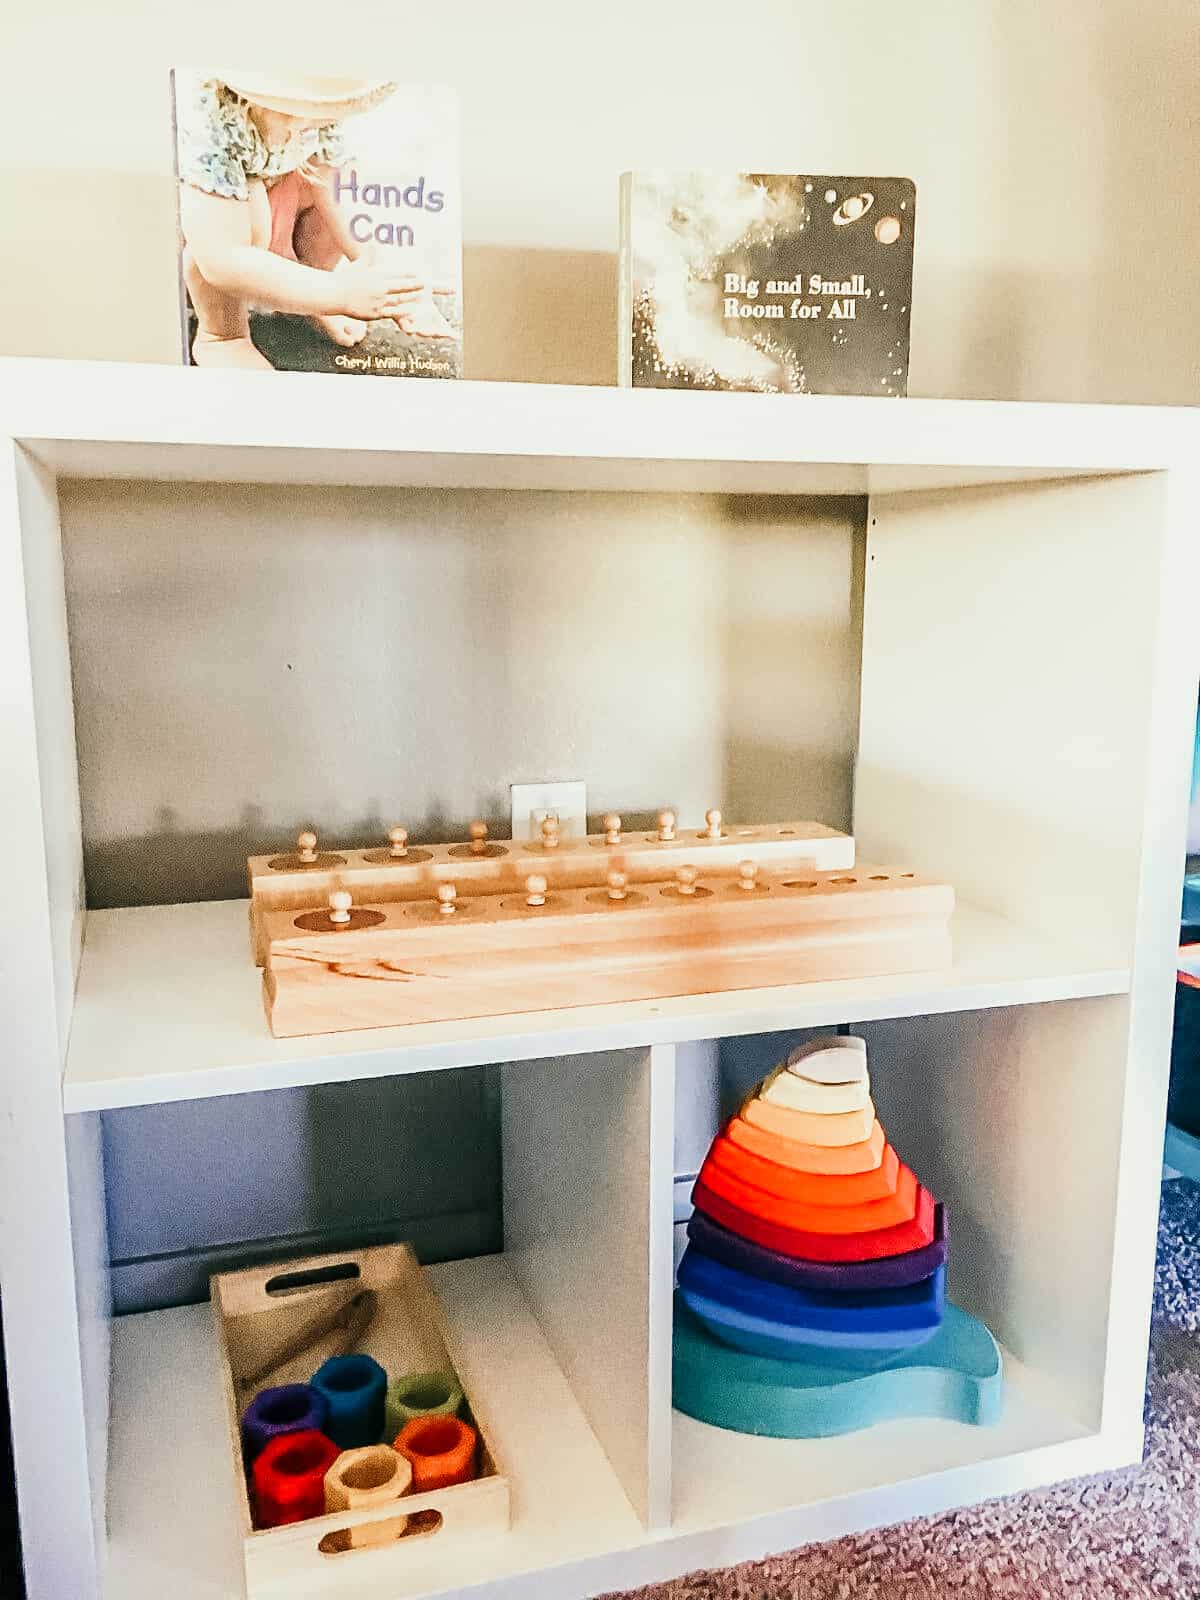 Open Shelves with Montessori materials, books, and toddler toys